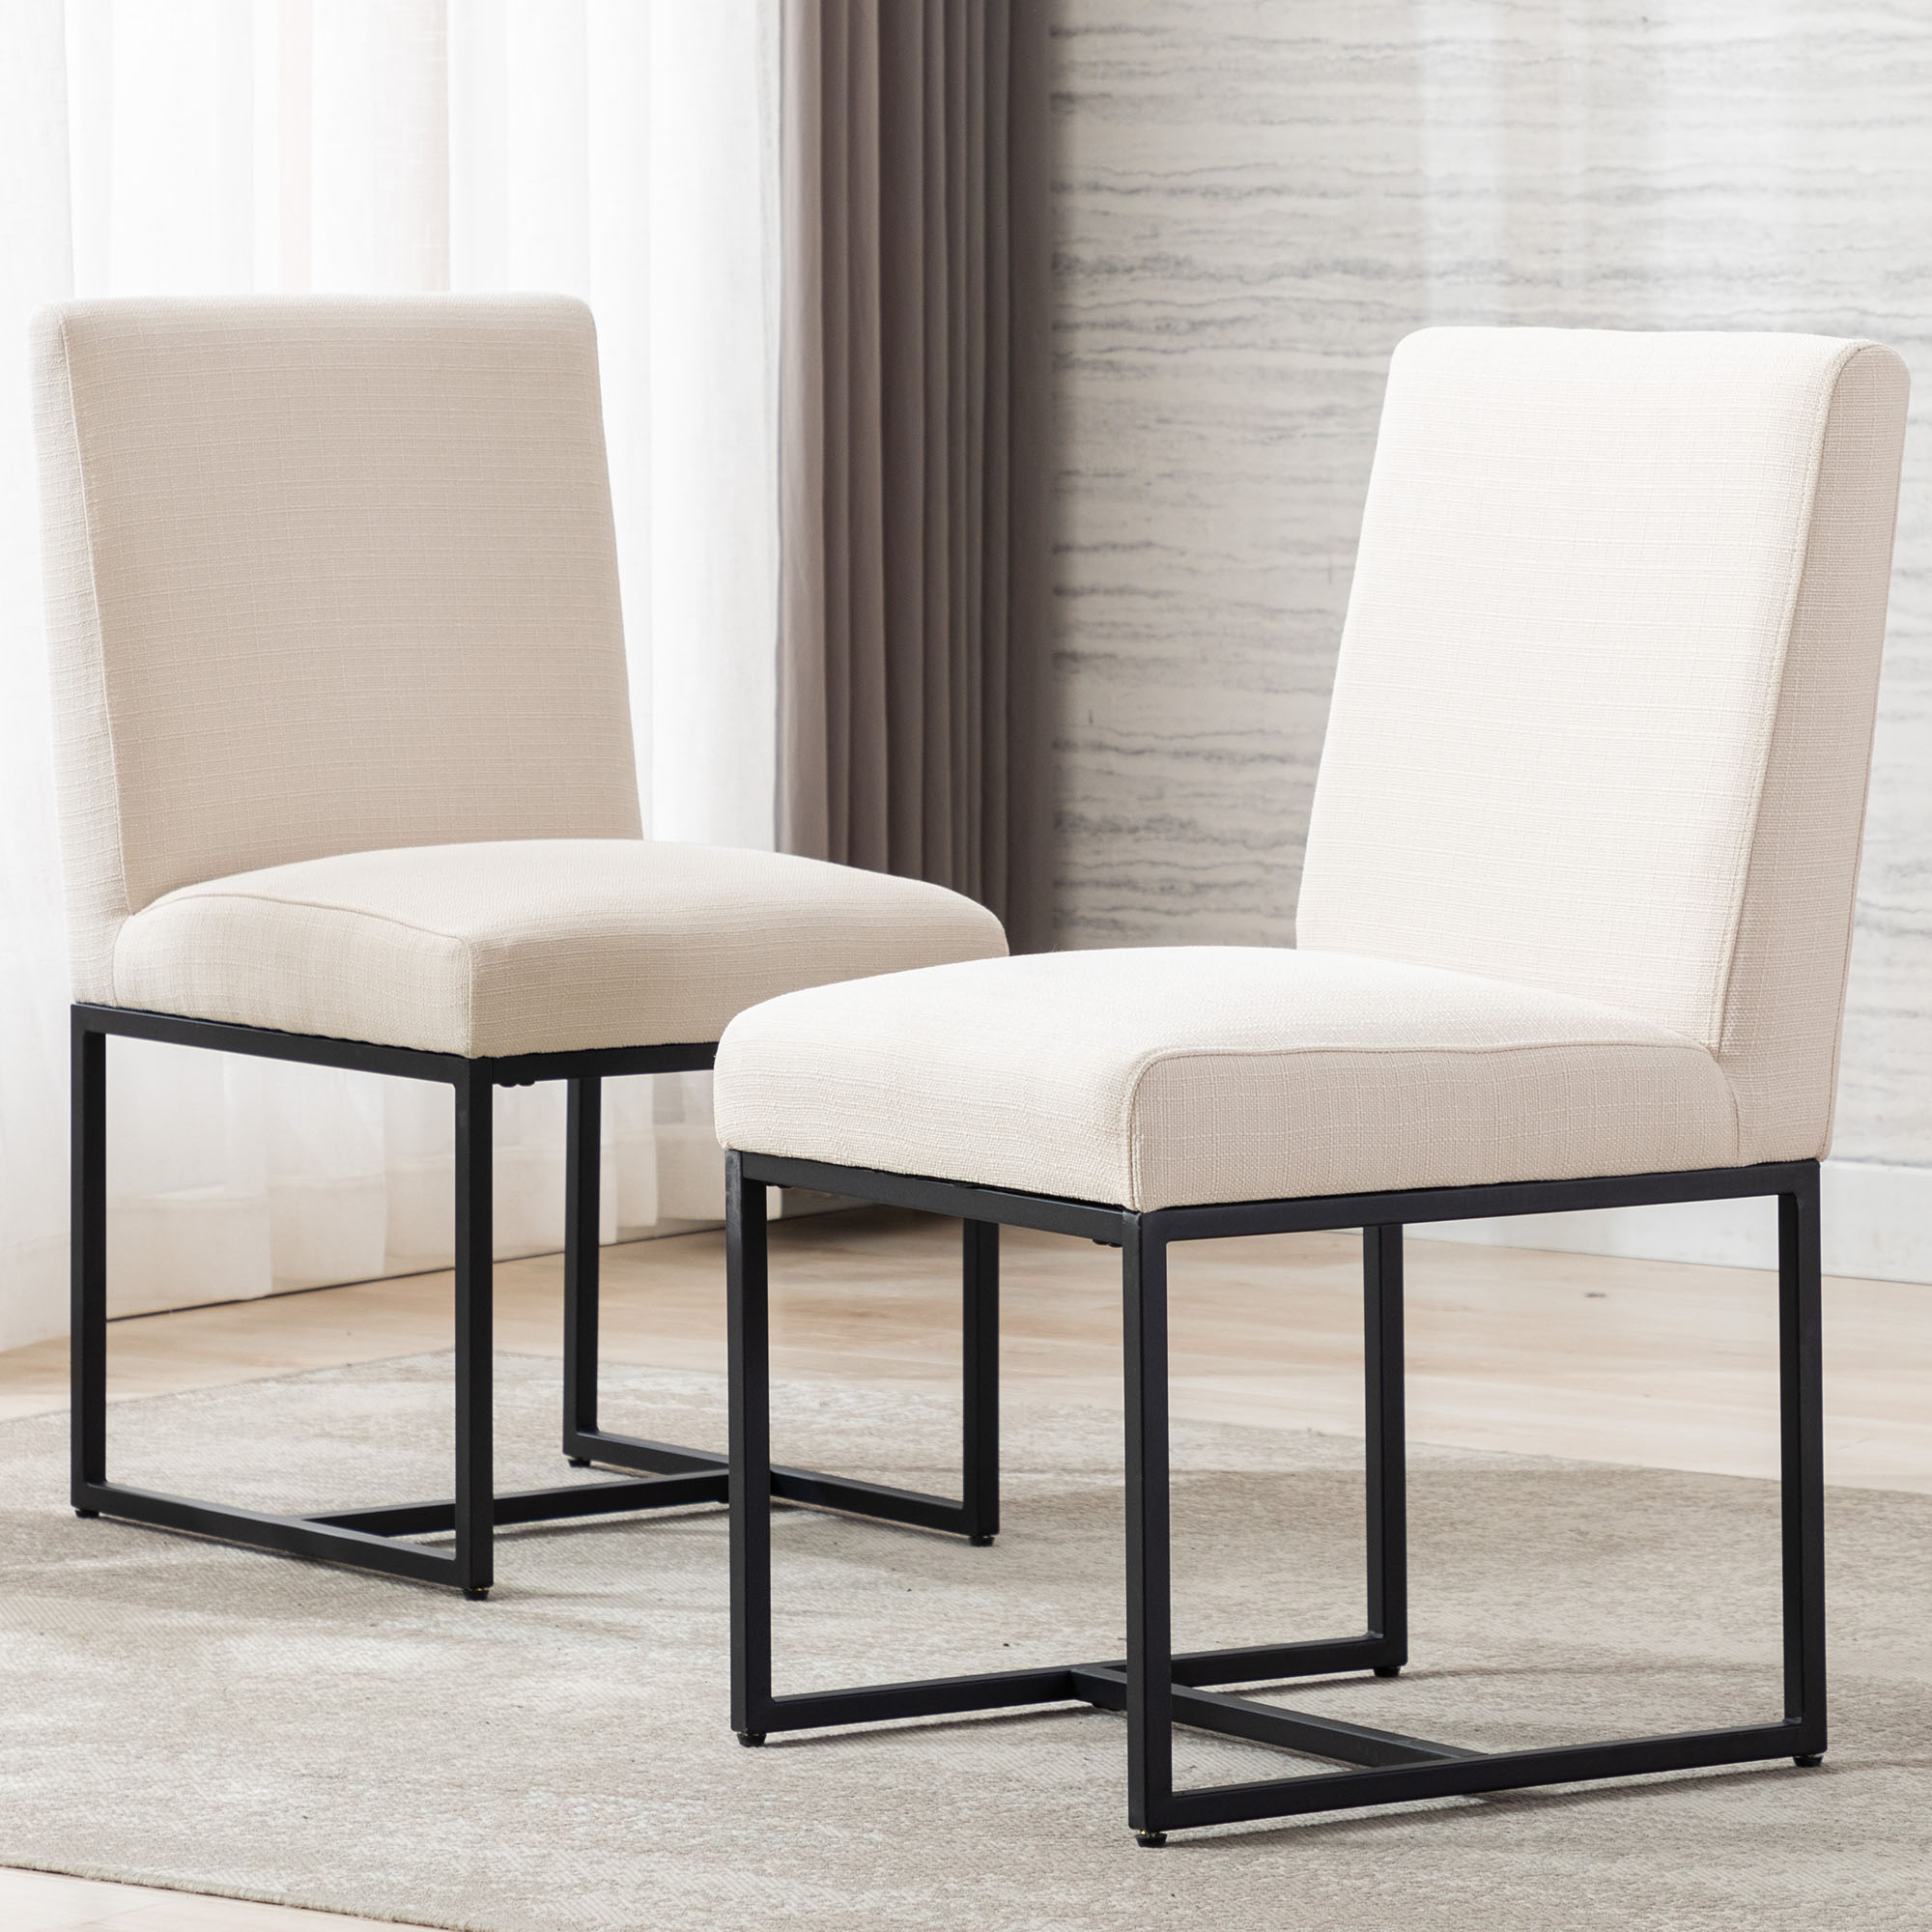 VESCASA Upholstered Dining Chairs with Metal Frame Set of 2